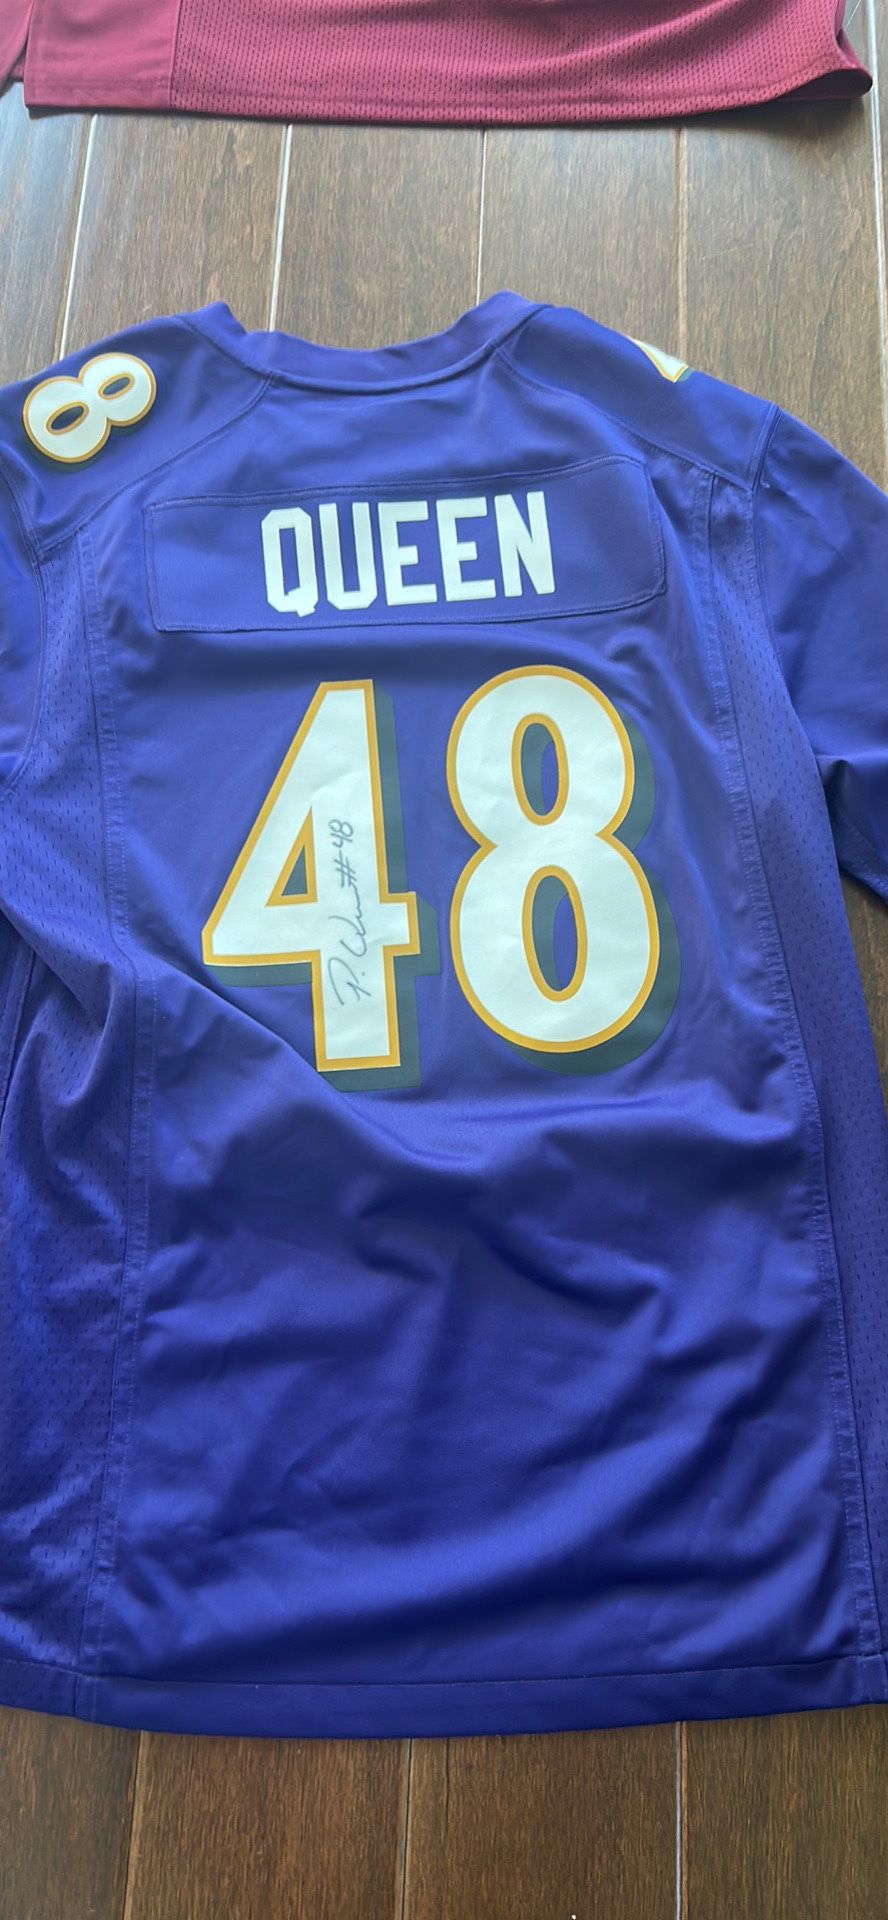 Patrick Queen Signed Rookie Jersey